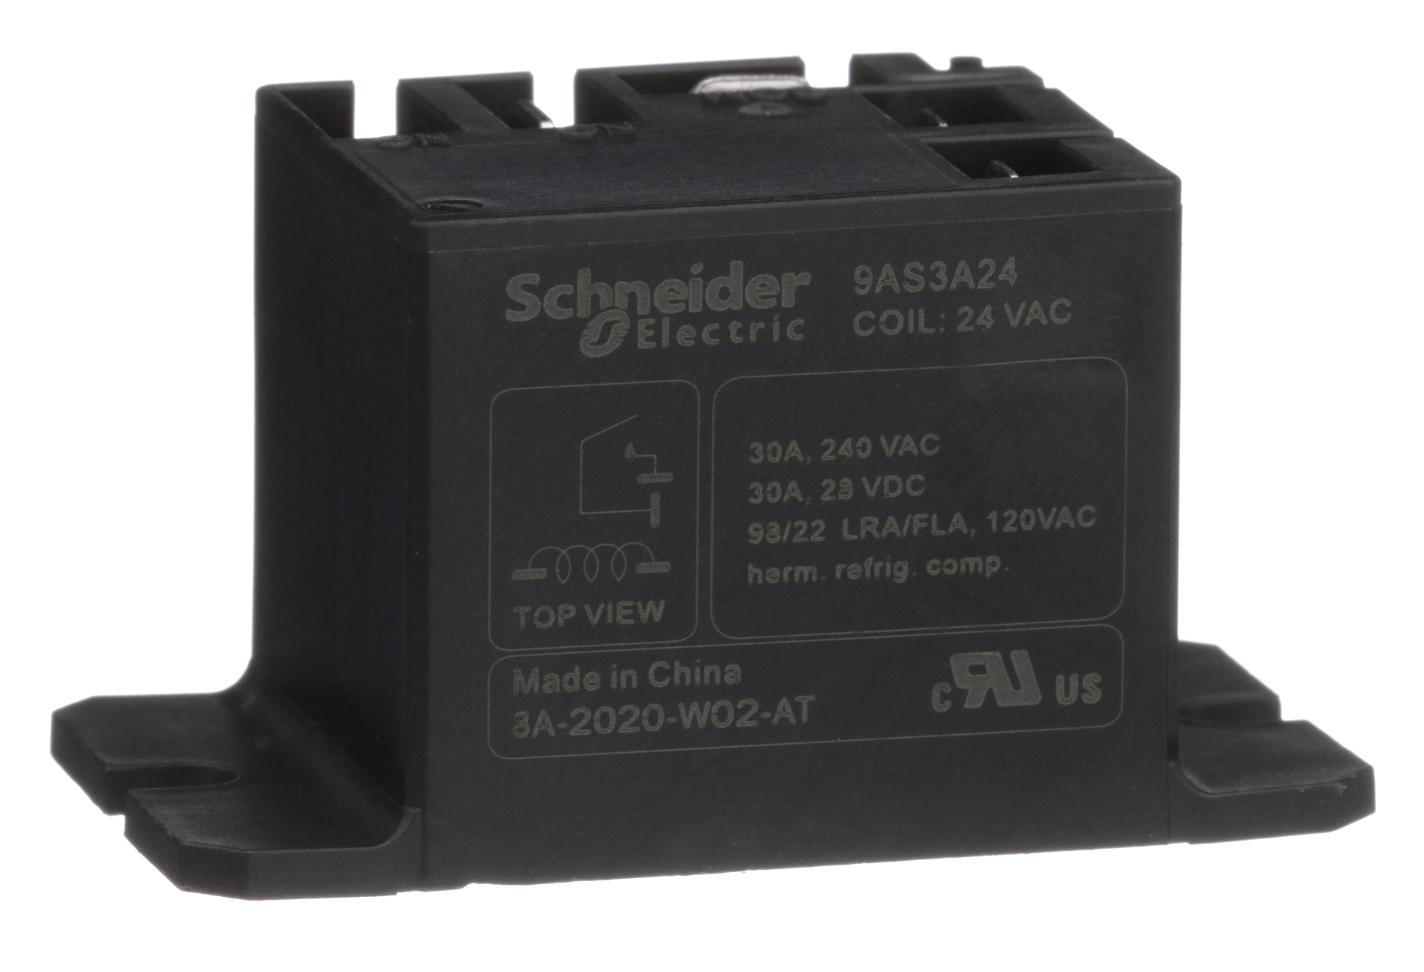 Schneider Electric/legacy Relay 9As3A24 Power Relay, Spst-No, 24Vac, 30A, Panel